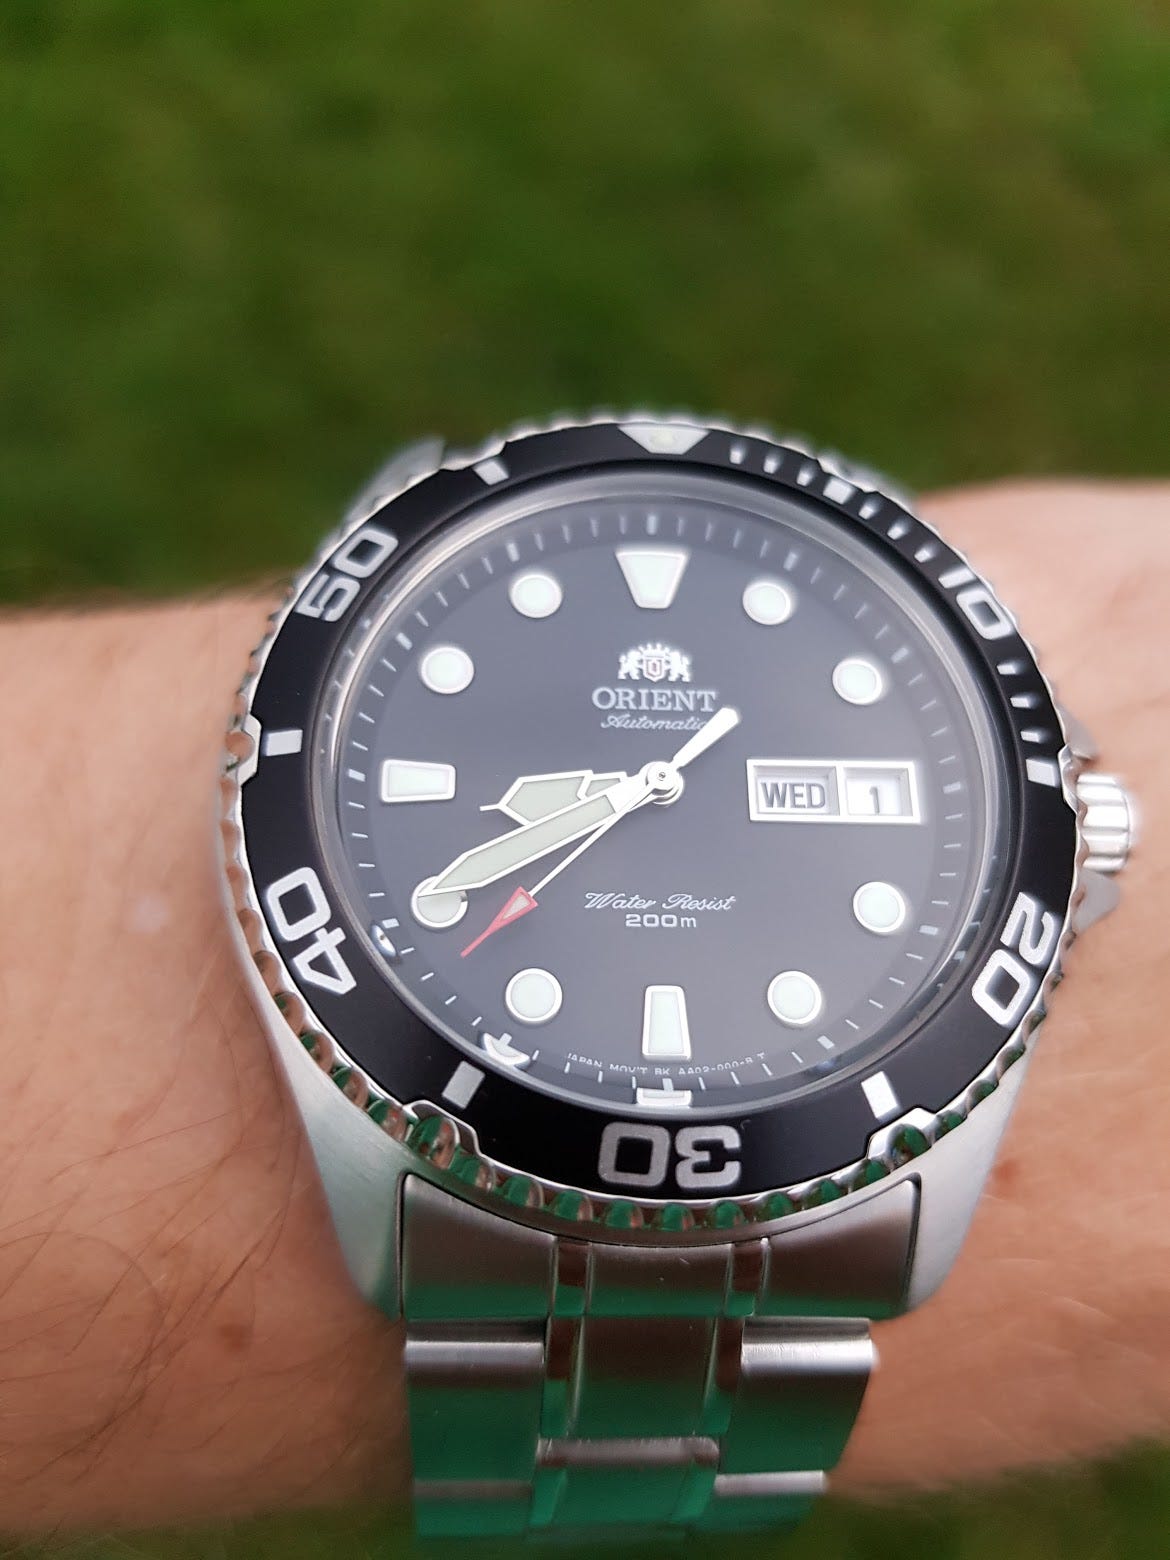 Why I decided for a Ray 2 Orient Automatic Dive Watch | by Stefan Pöltl |  Medium